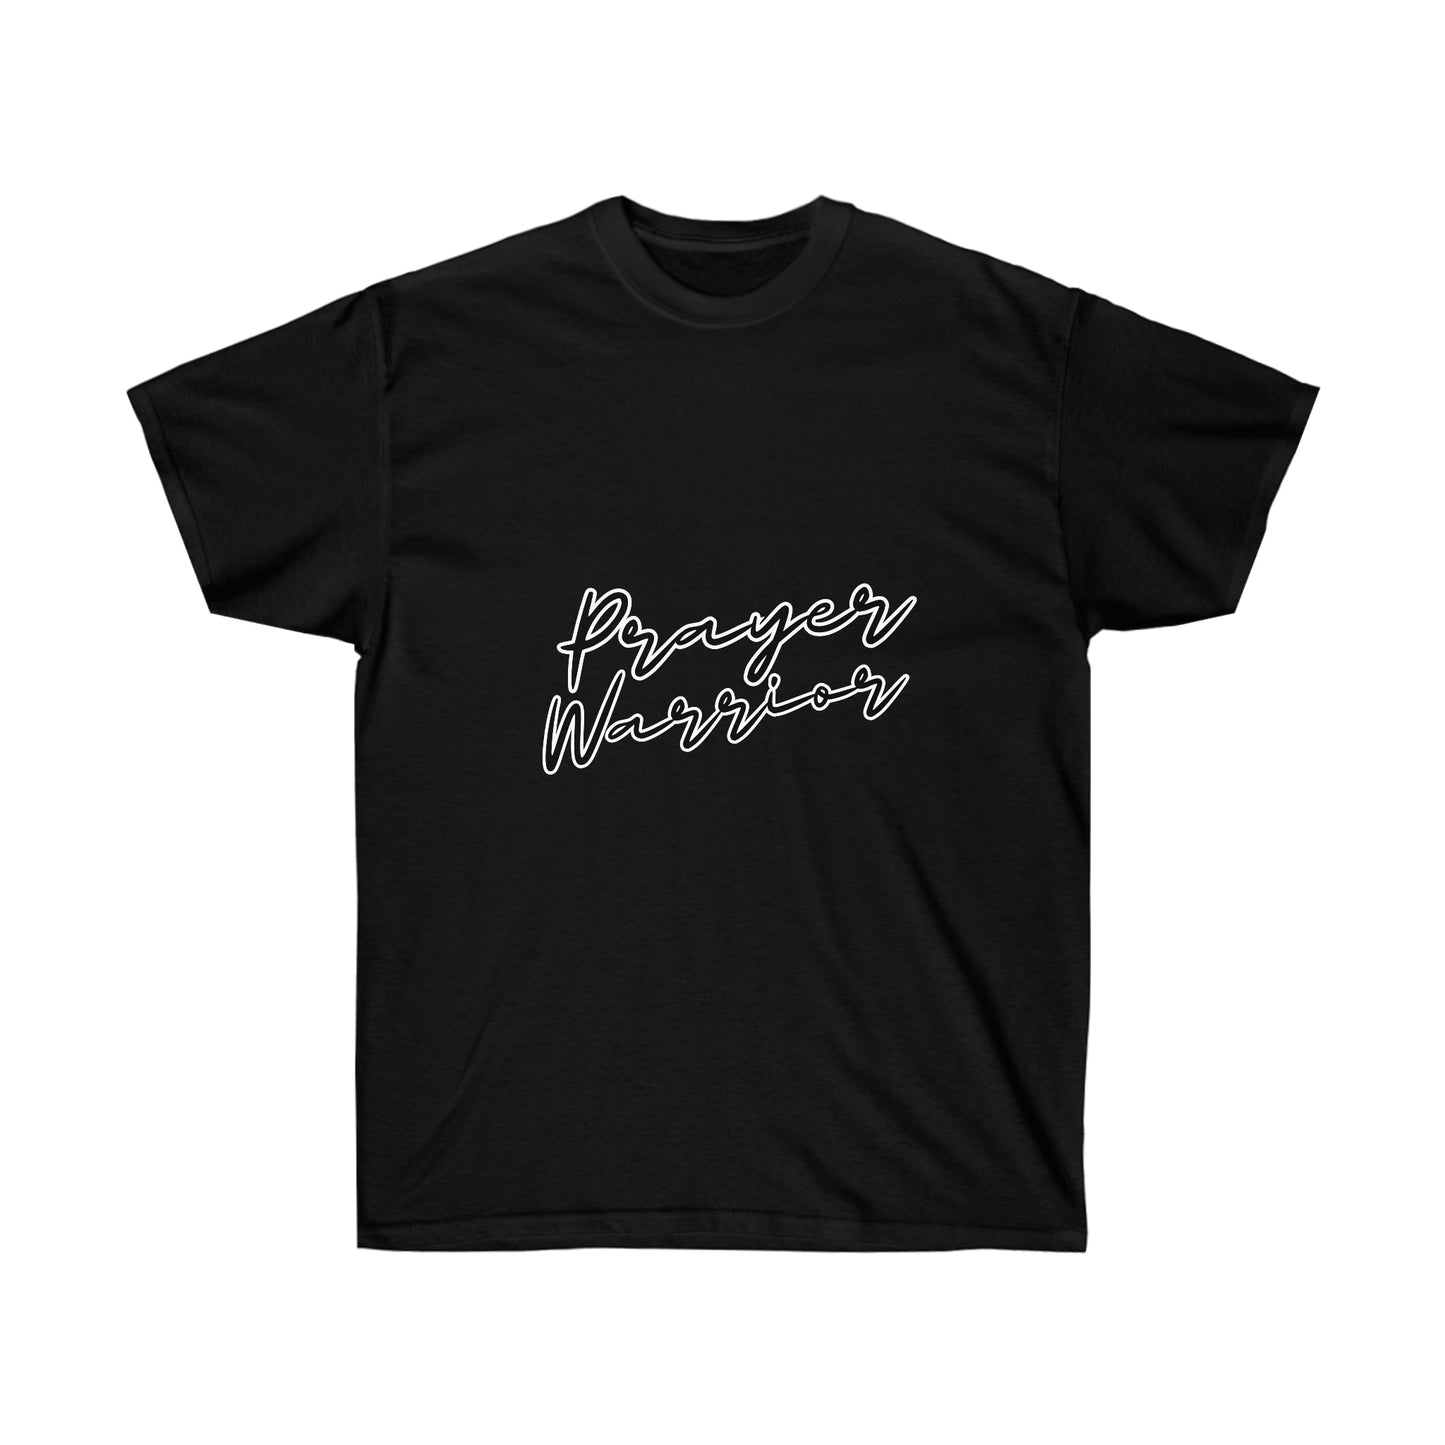 Prayer Warrior with Black Text Outlined in White Tee Shirt - KawaTazza